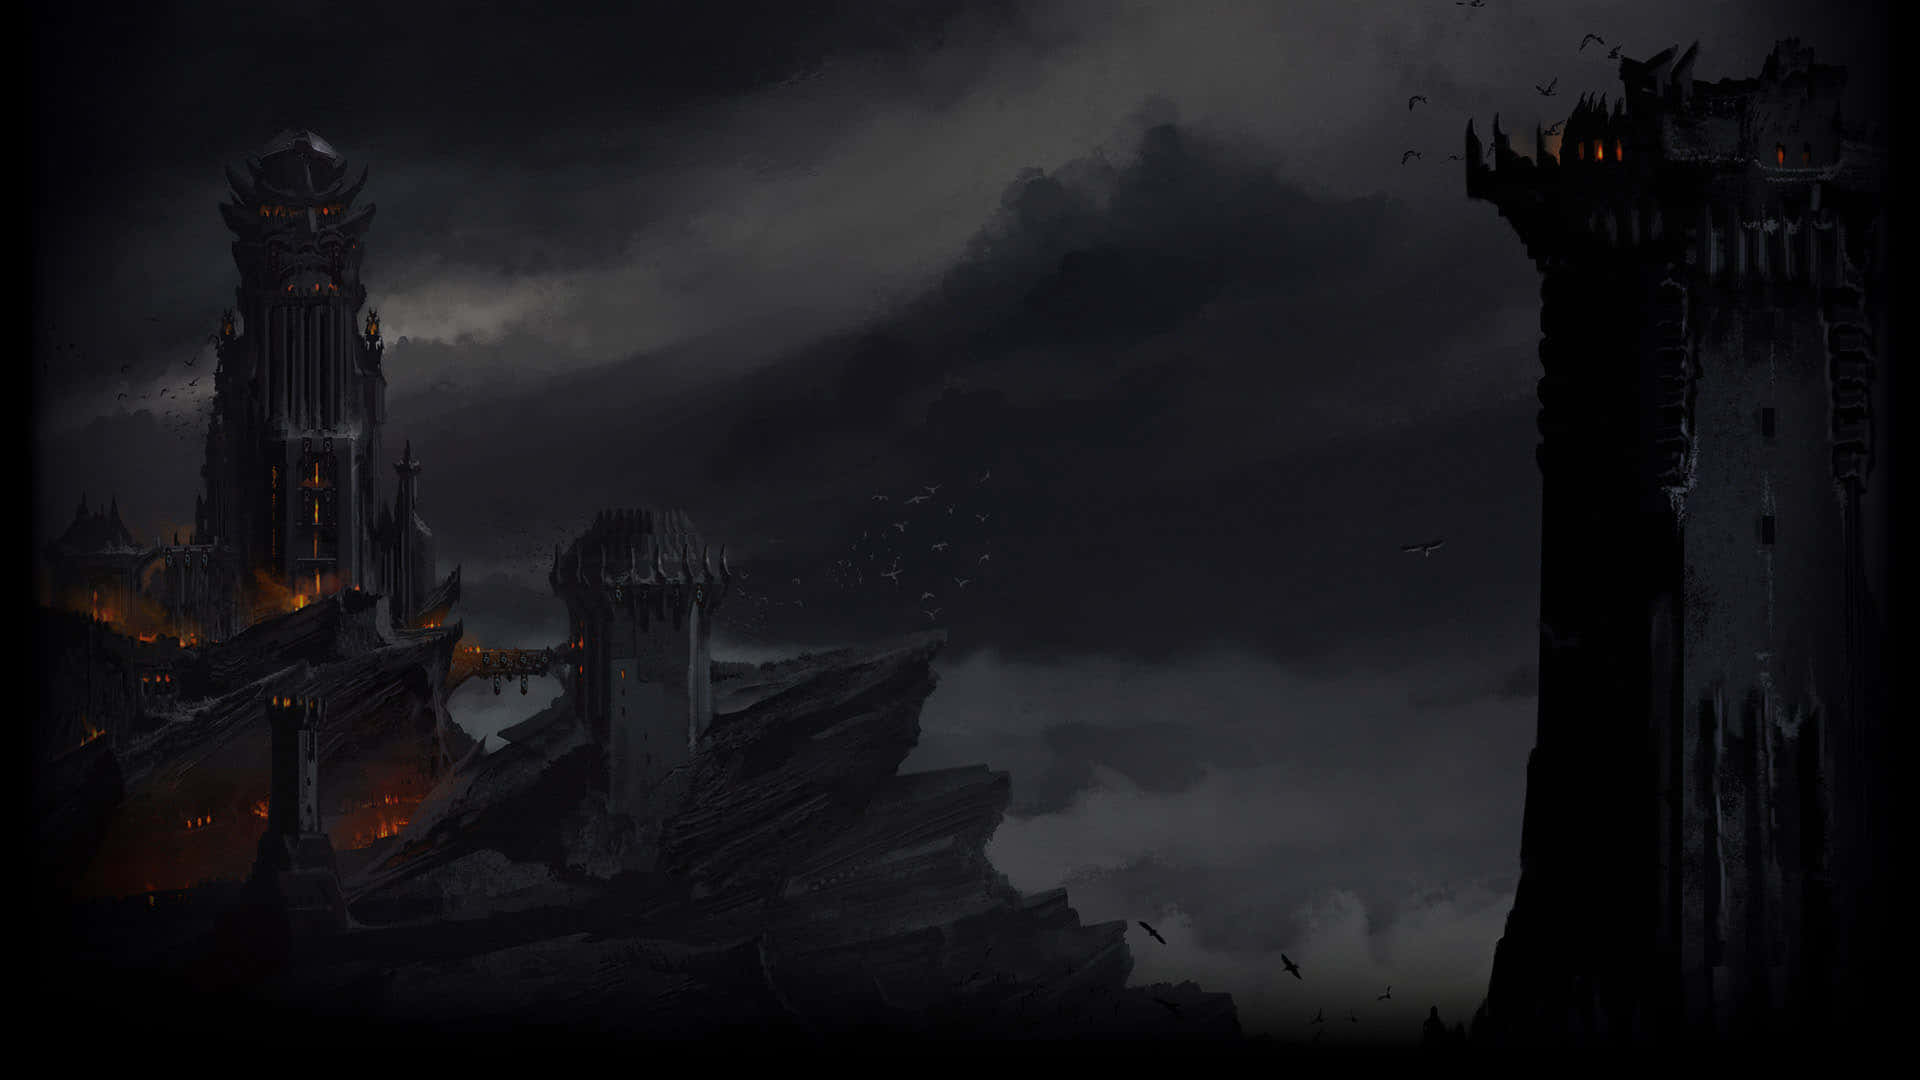 Mysterious Dark Tower Rising Against a Stormy Sky Wallpaper